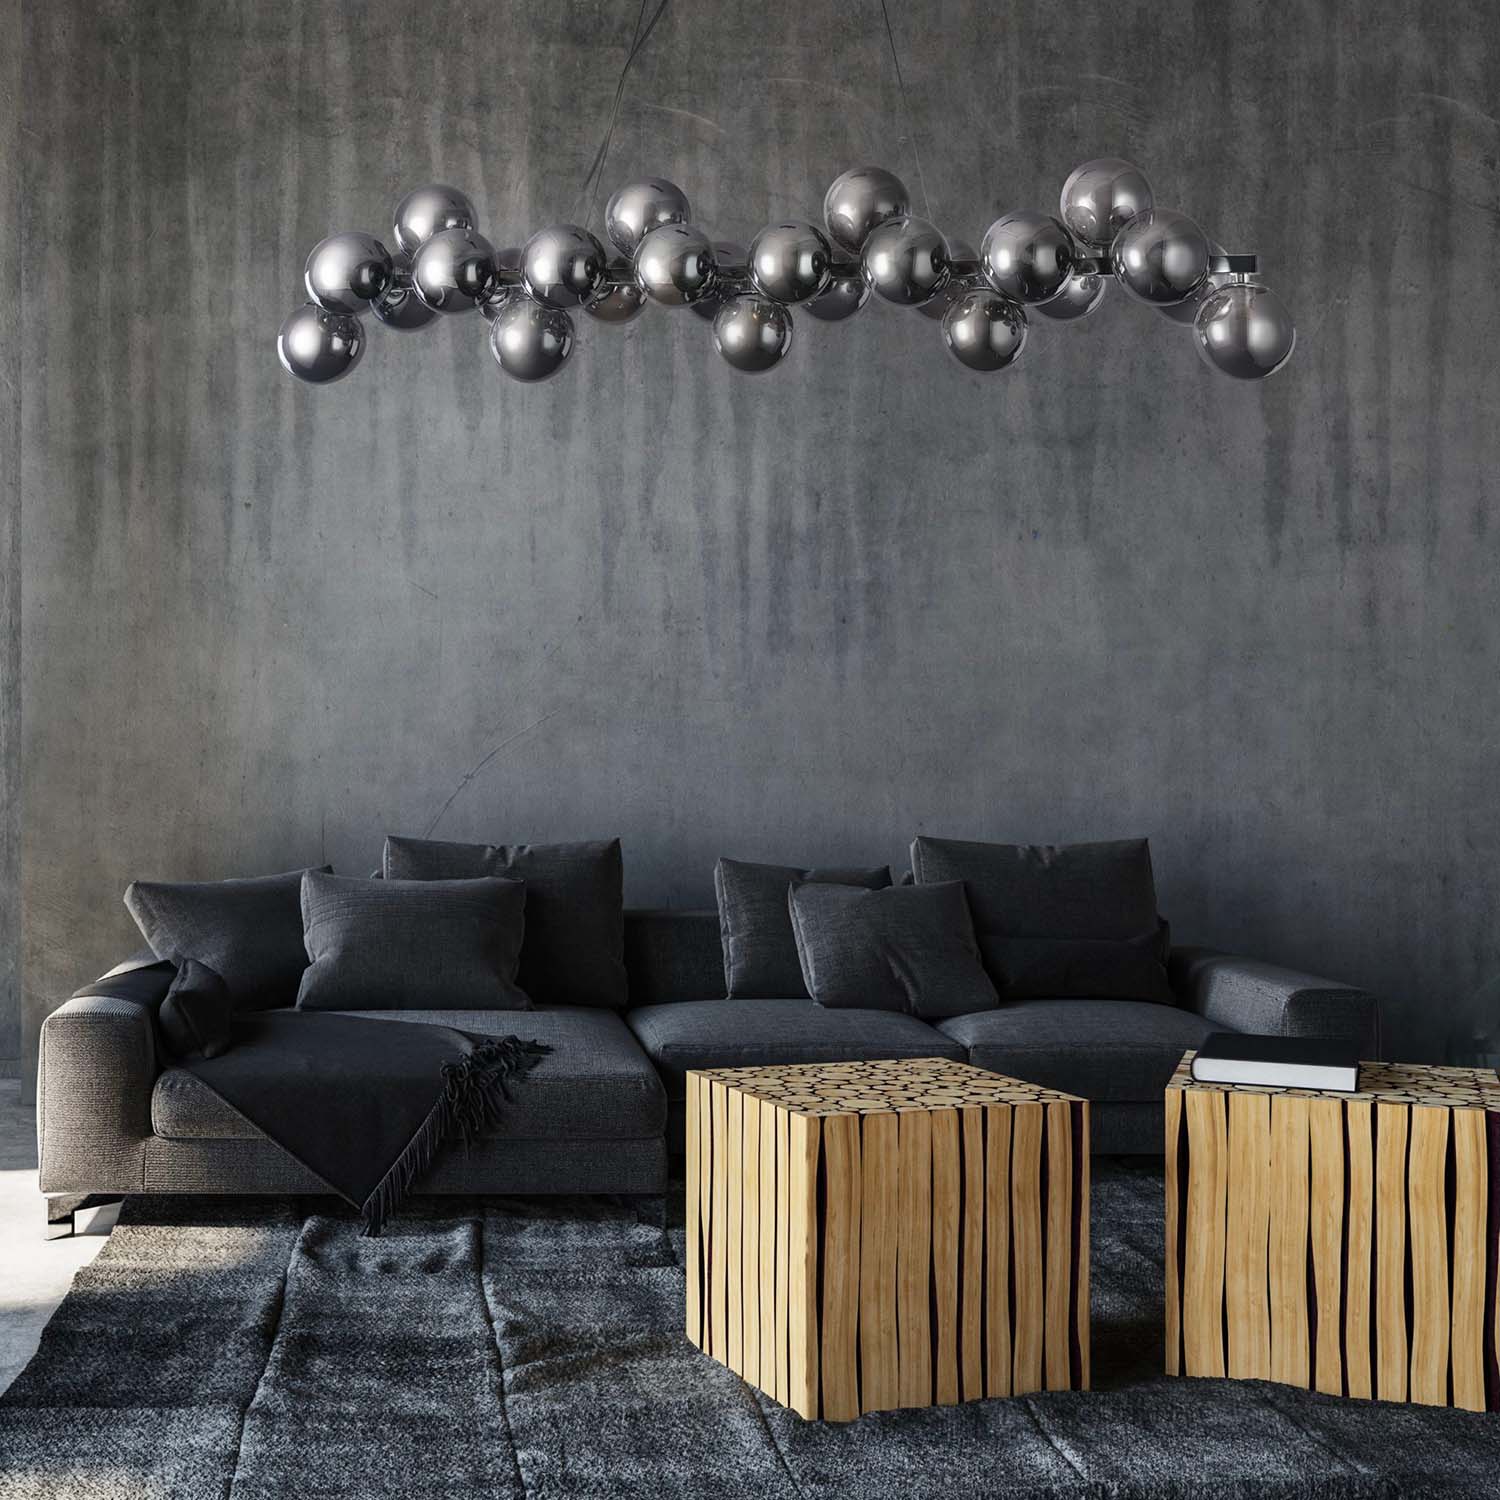 DALLAS B - Modern one-way glass chandelier for dining room